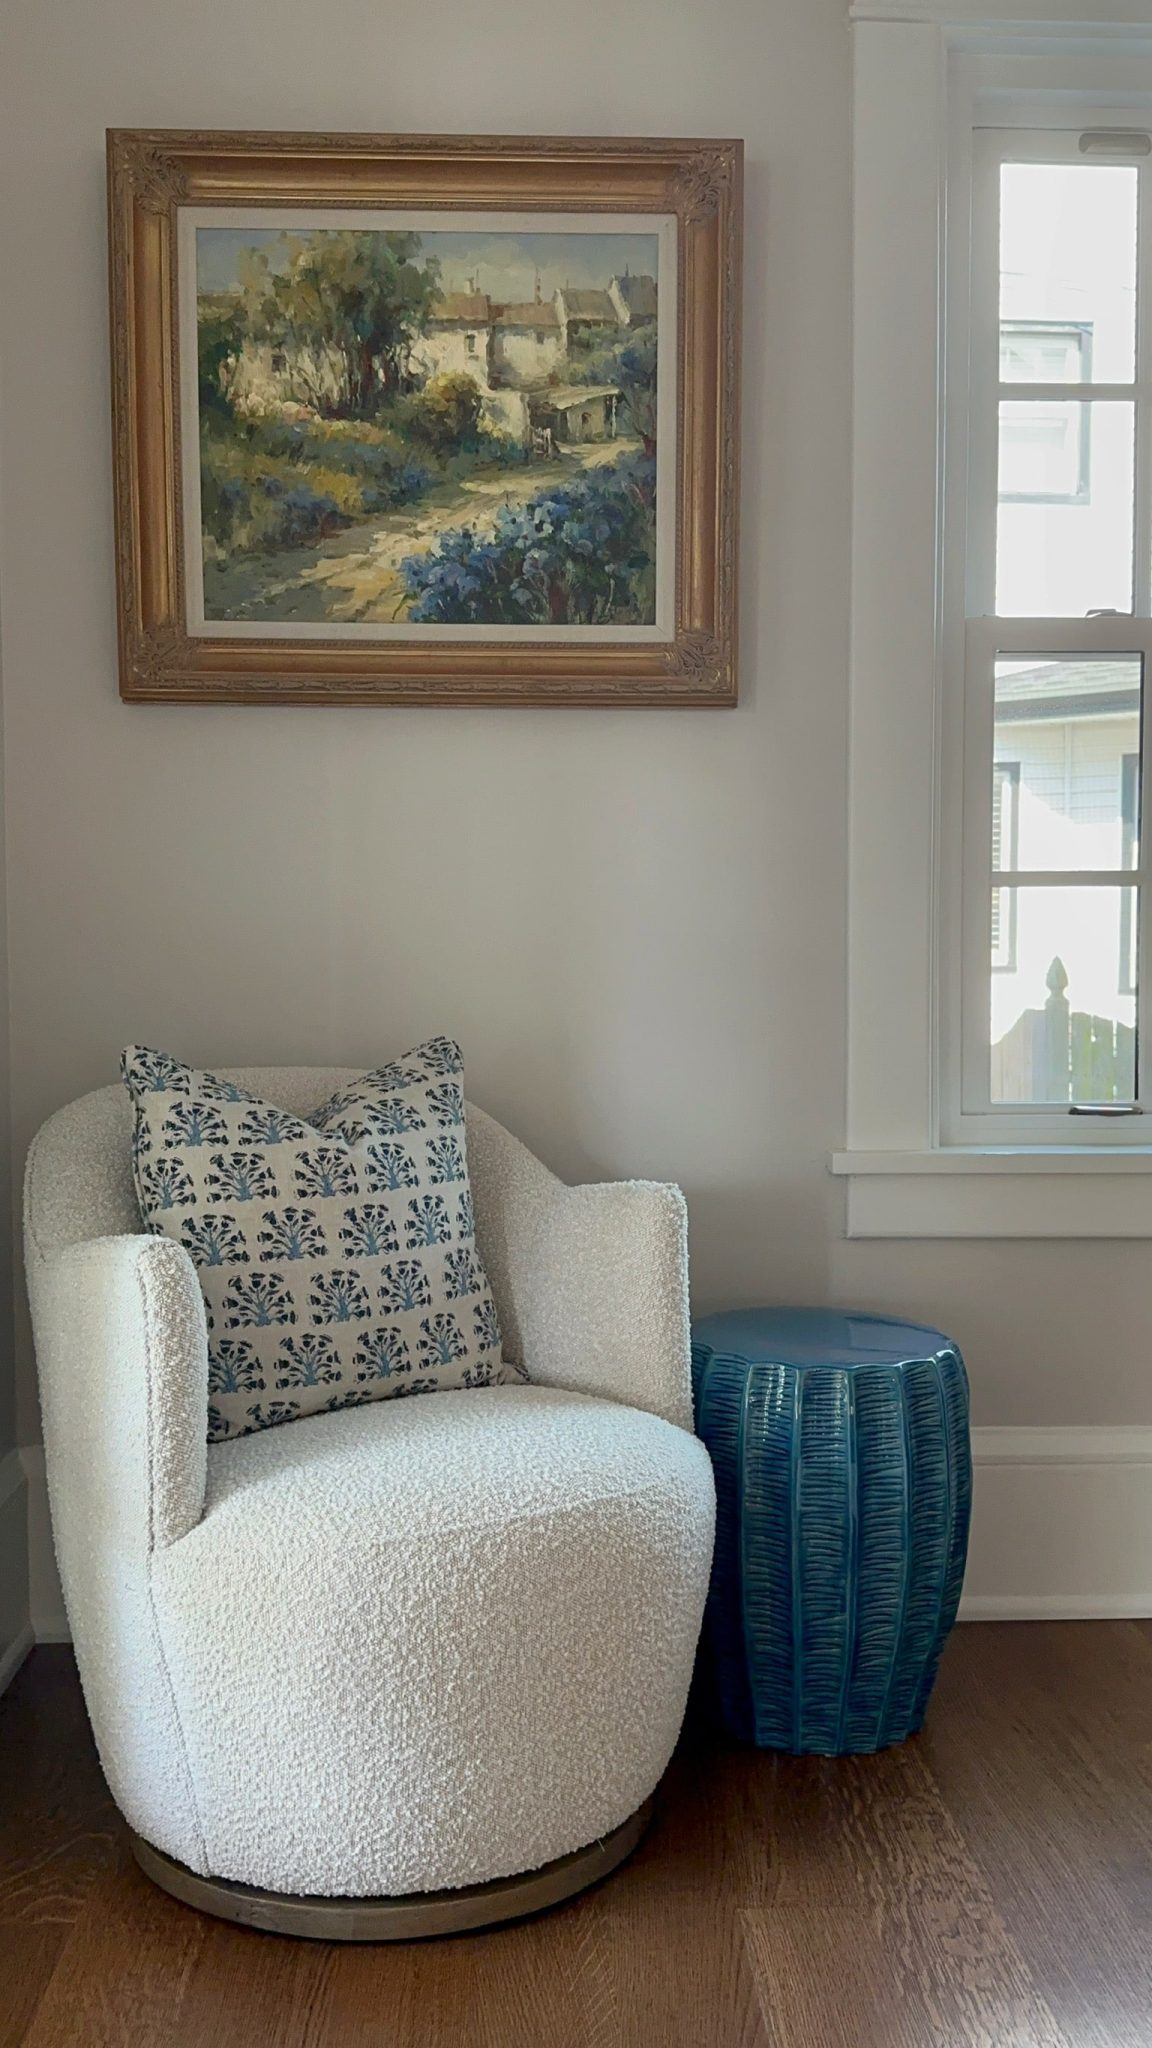 A chair strategically placed in front of a window, perfectly complementing the interior design with the added touch of a captivating painting.